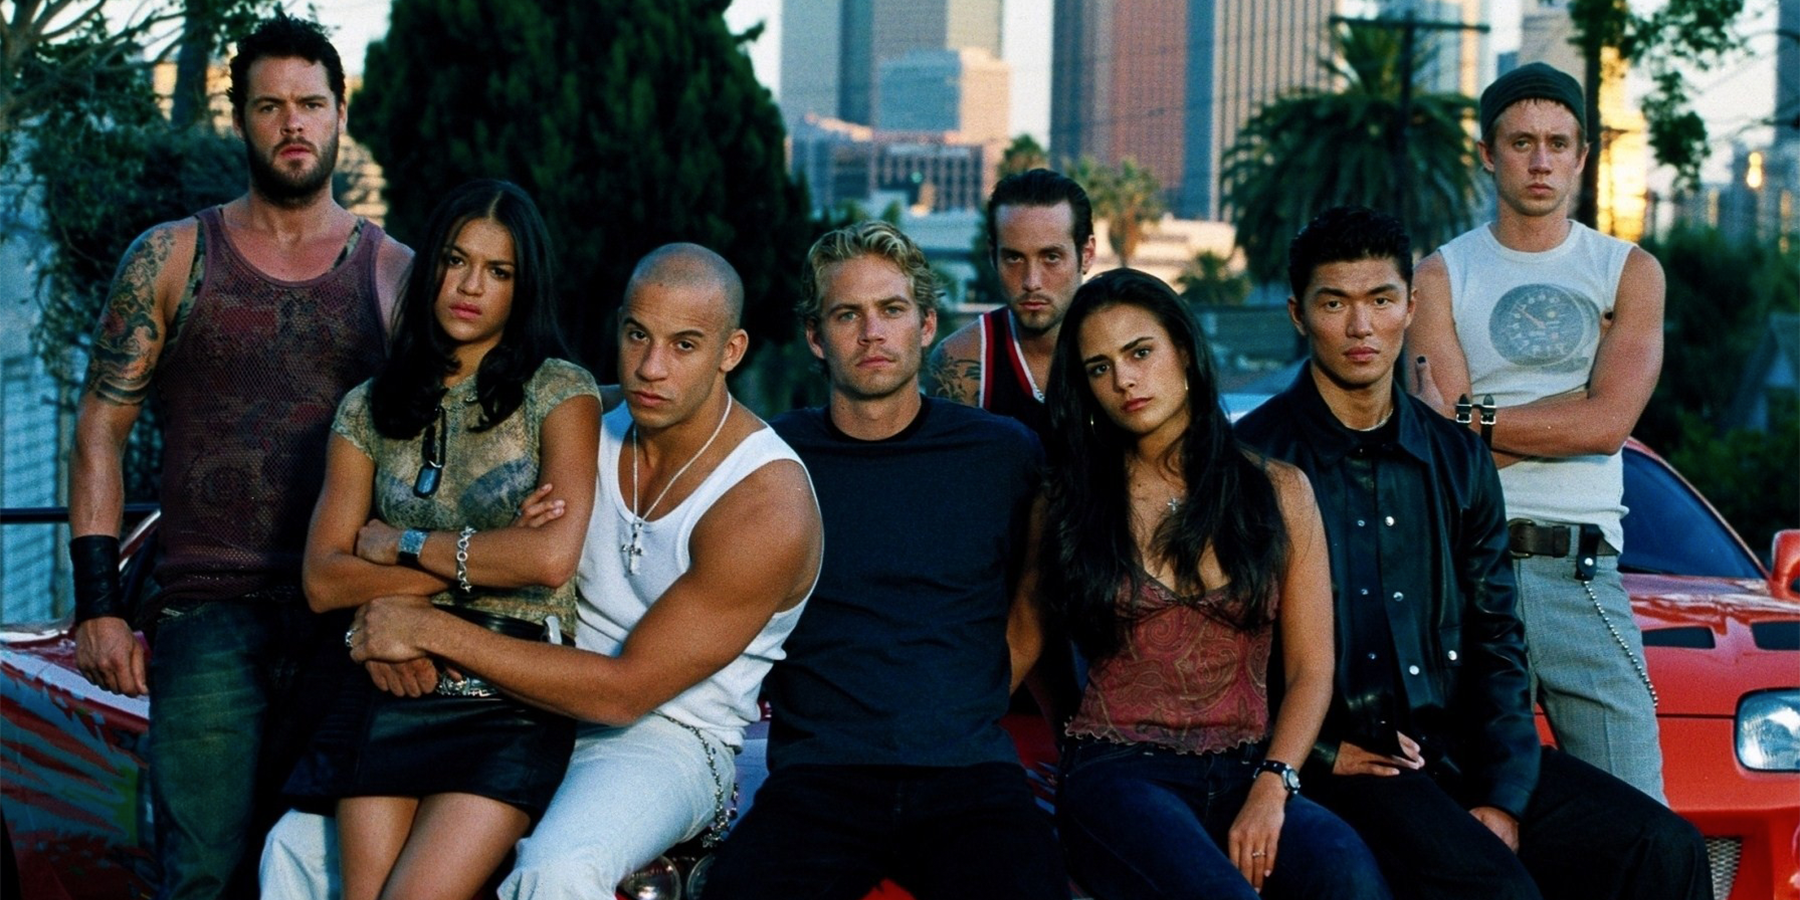 The Fast and the Furious cast sitting together in front of the LA skyline